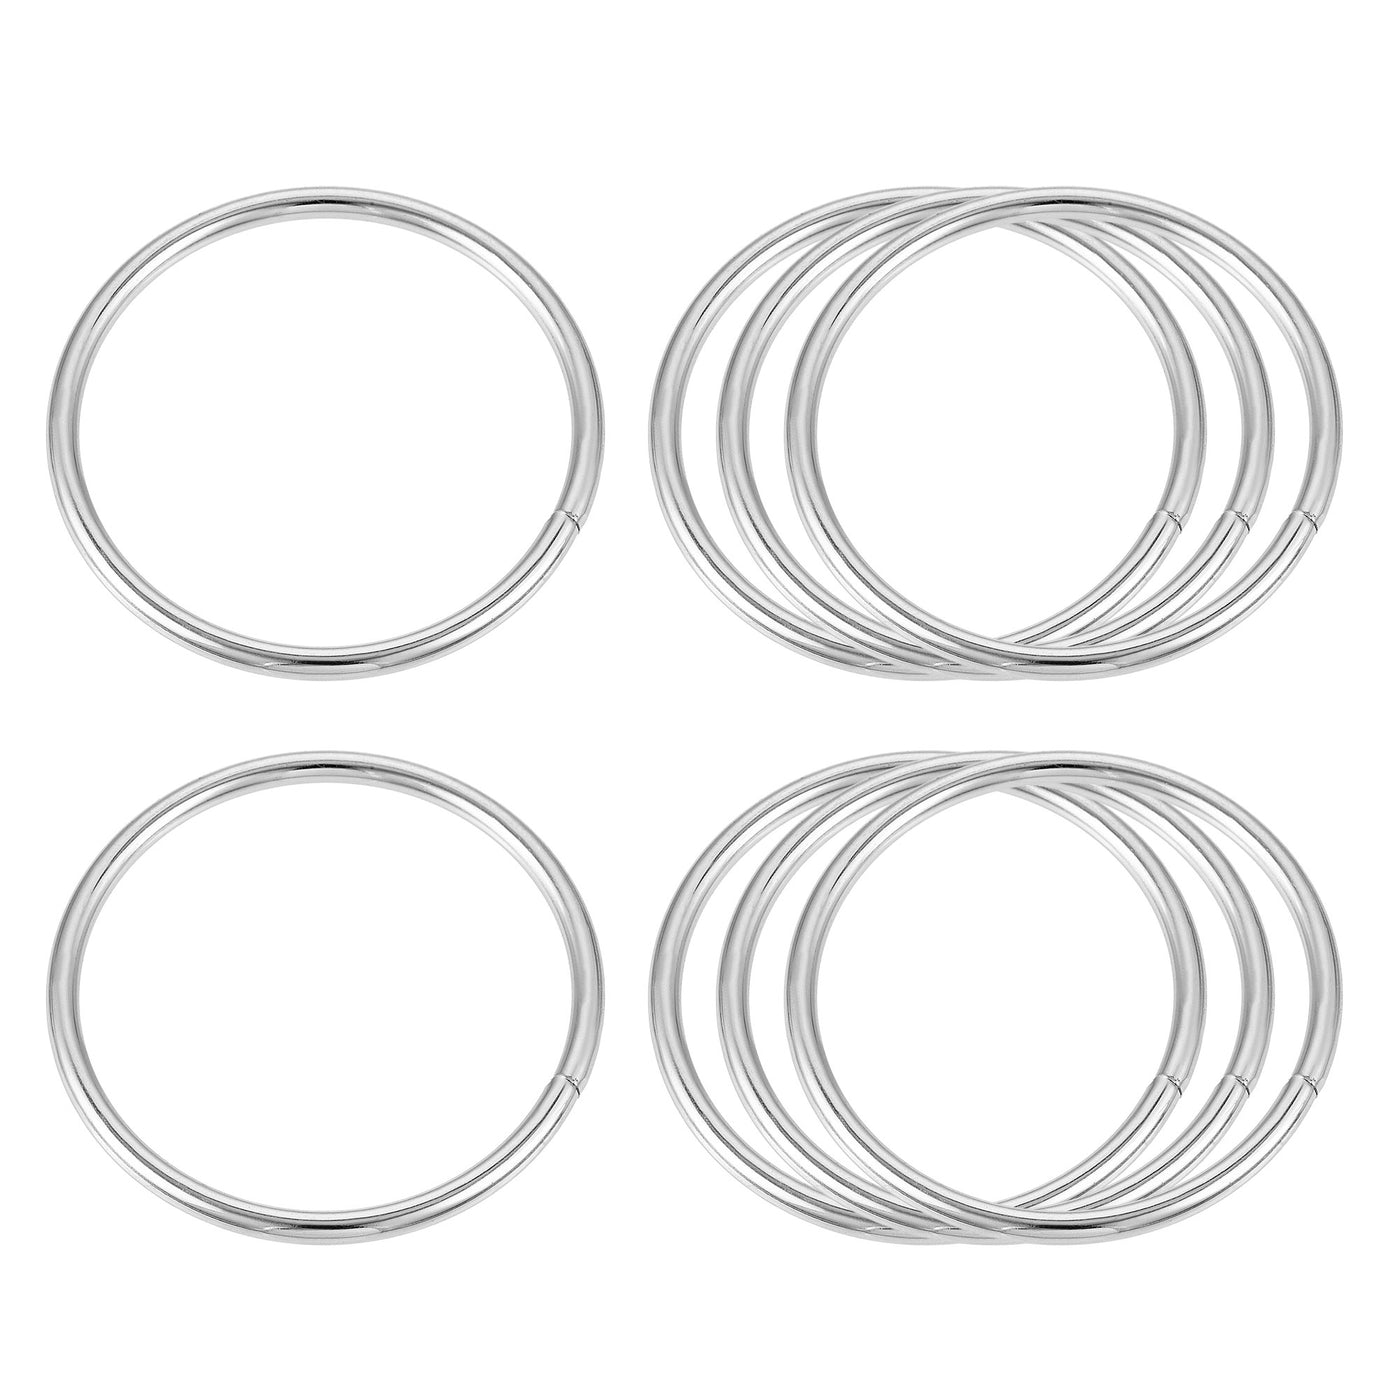 Harfington Metal O Rings, 8pcs 50mm(1.97") ID 3.5mm Thick Non-Welded O-Ring, Silver Tone